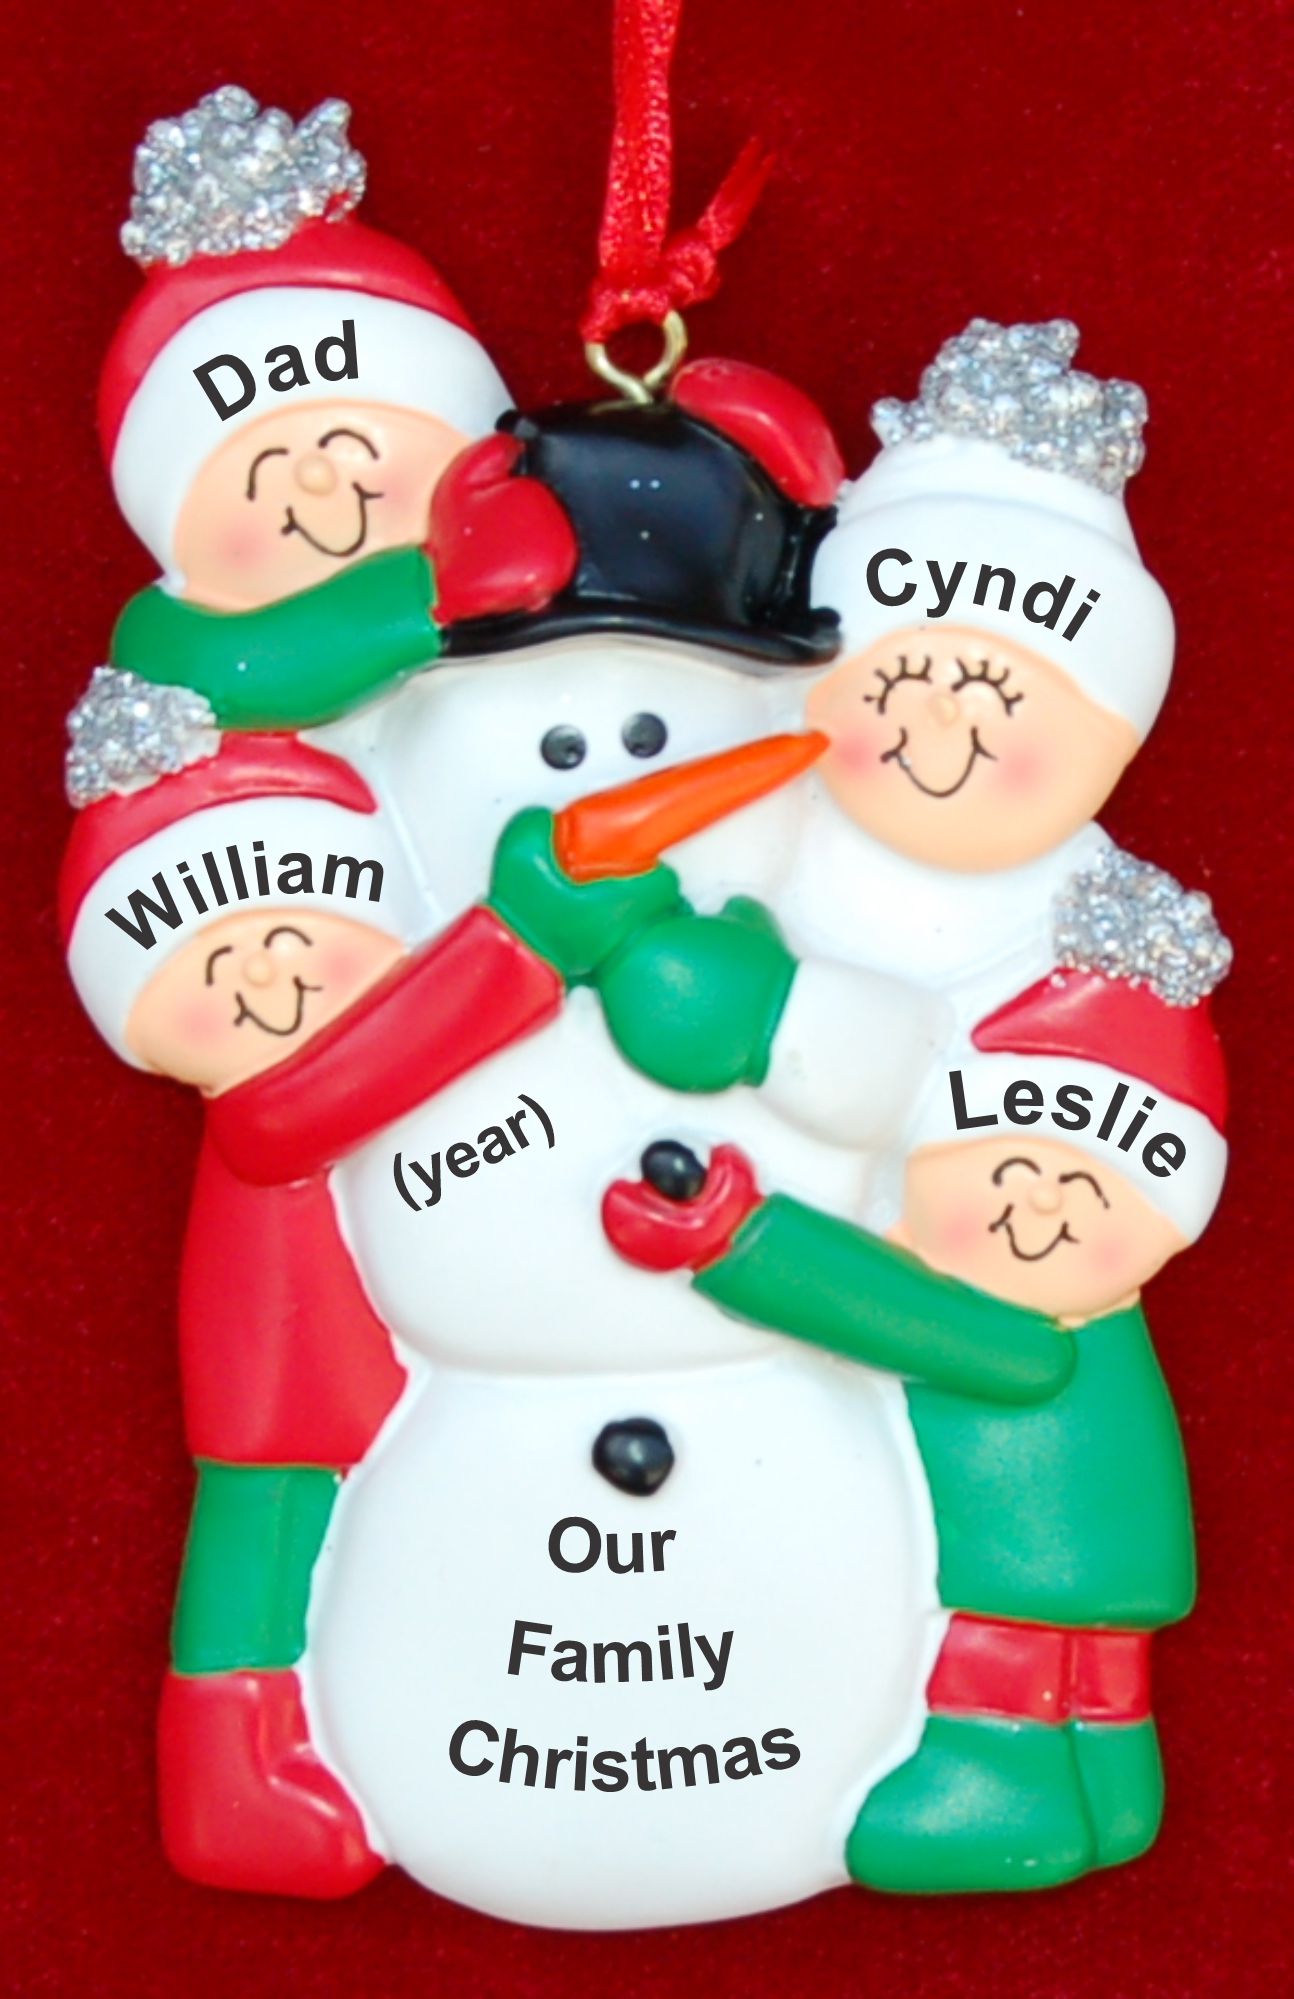 Single Dad Christmas Ornament Making Snowman 3 Kids Personalized by RussellRhodes.com